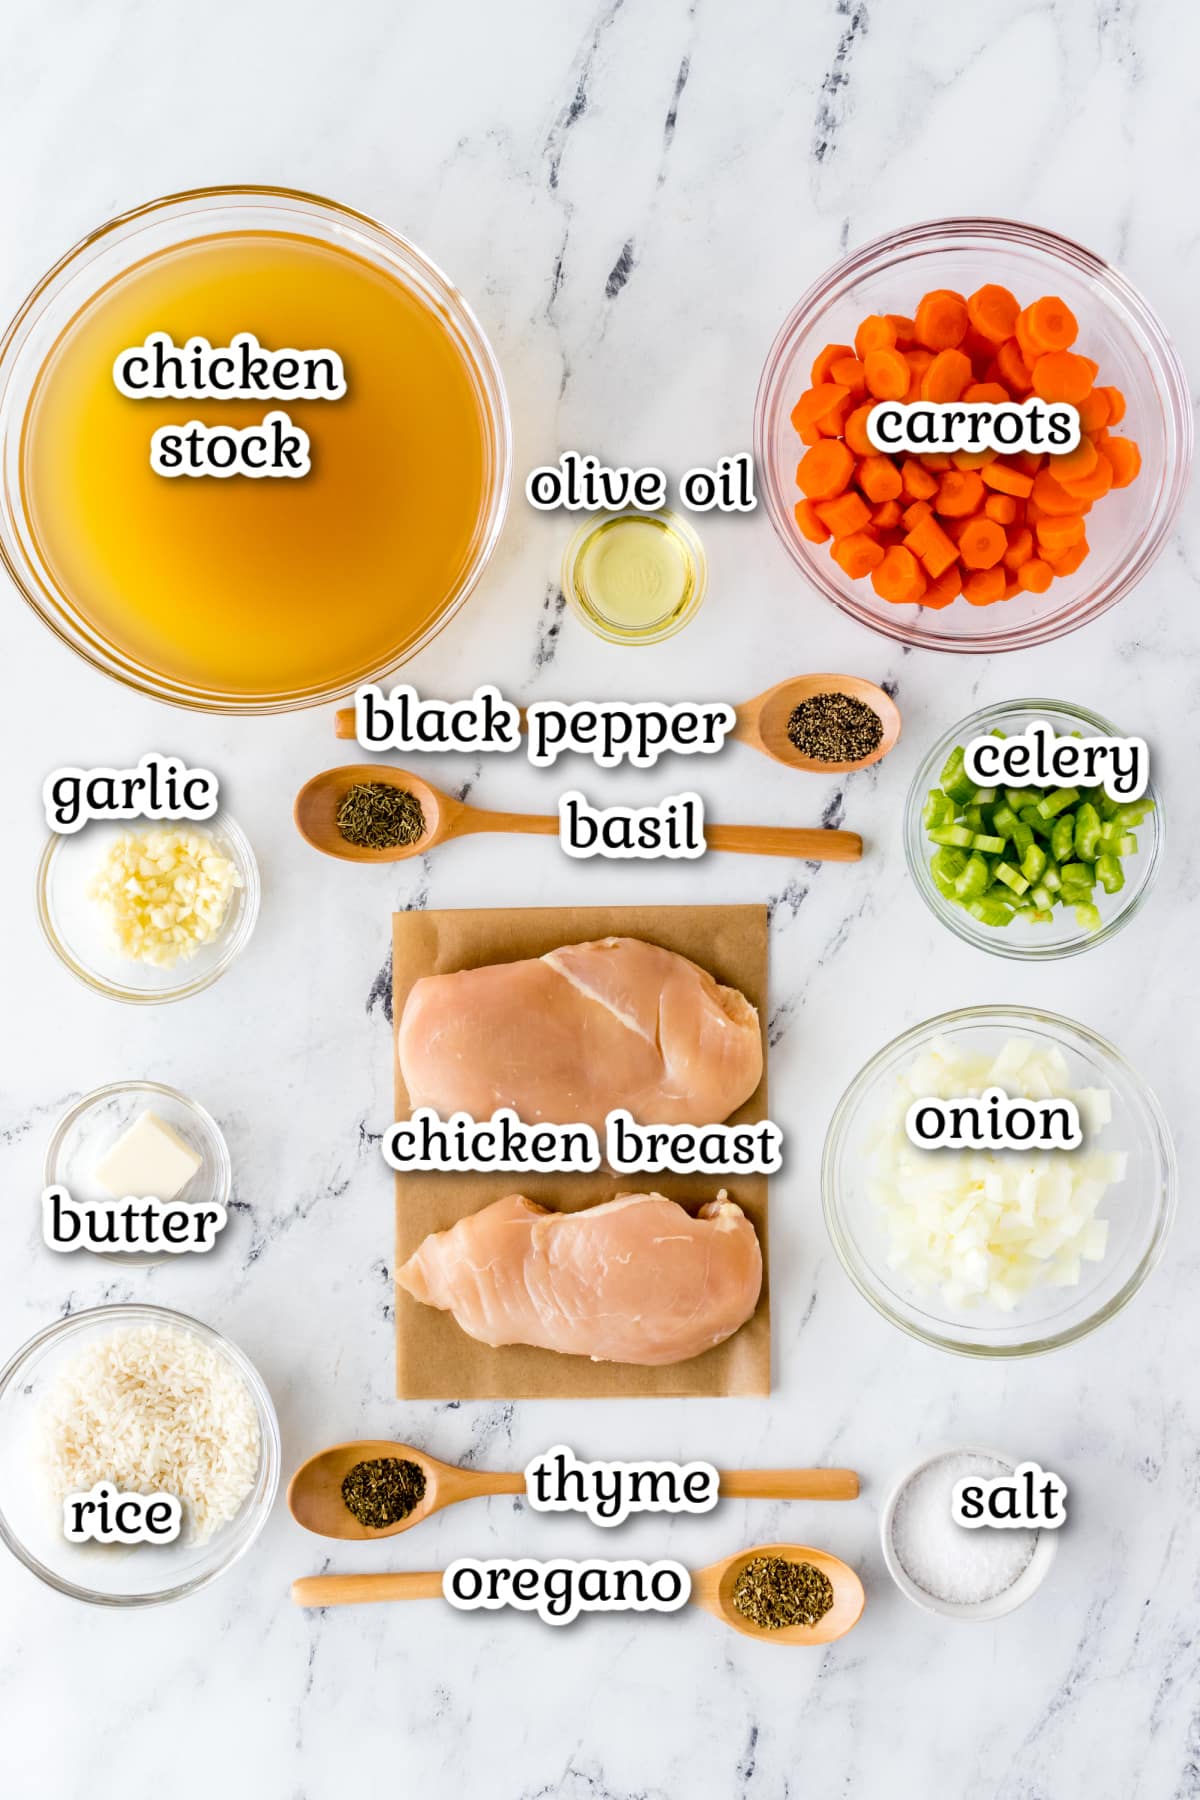 Ingredients for the recipe on a white surface.